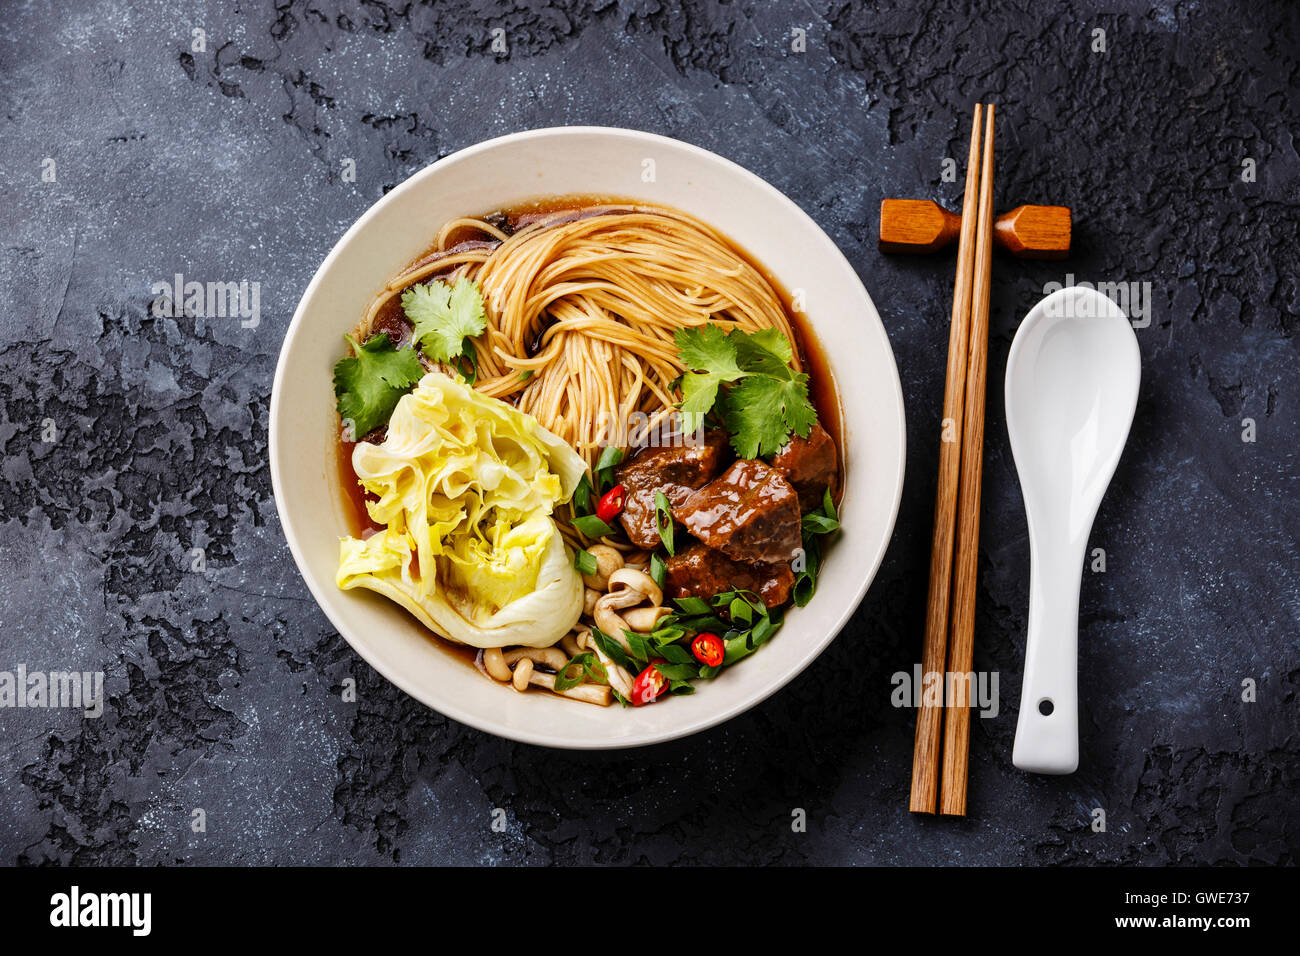 Spicy asian noodles in broth with Beef on dark background Stock Photo